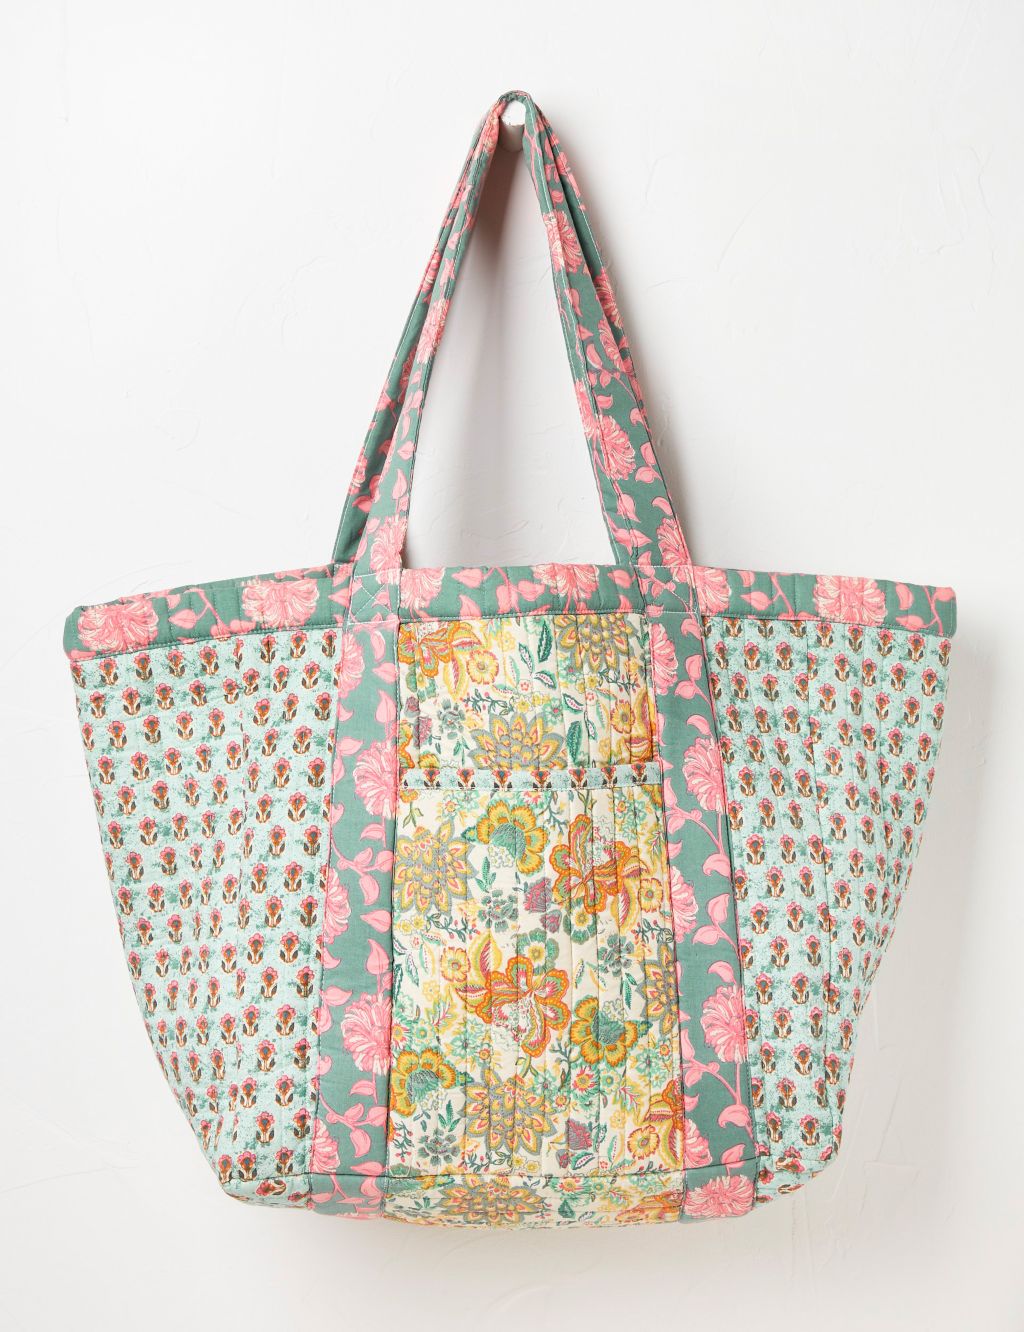 Cotton Rich Floral Quilted Tote Bag image 1